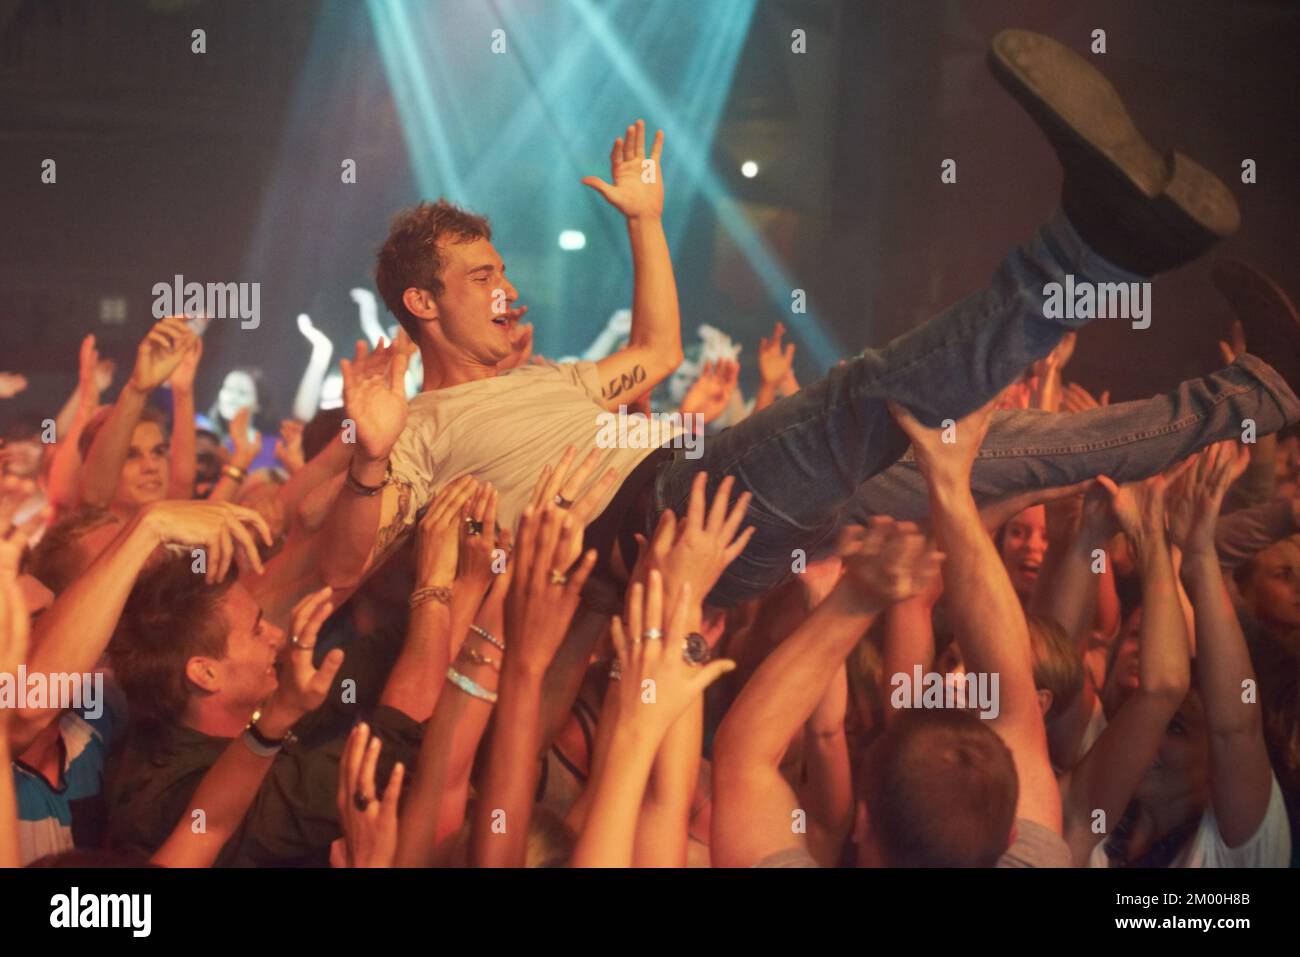 Music, party and crowd surfing with man at concert for rock, celebration and festival. Energy, light and dance with audience listening to live band Stock Photo